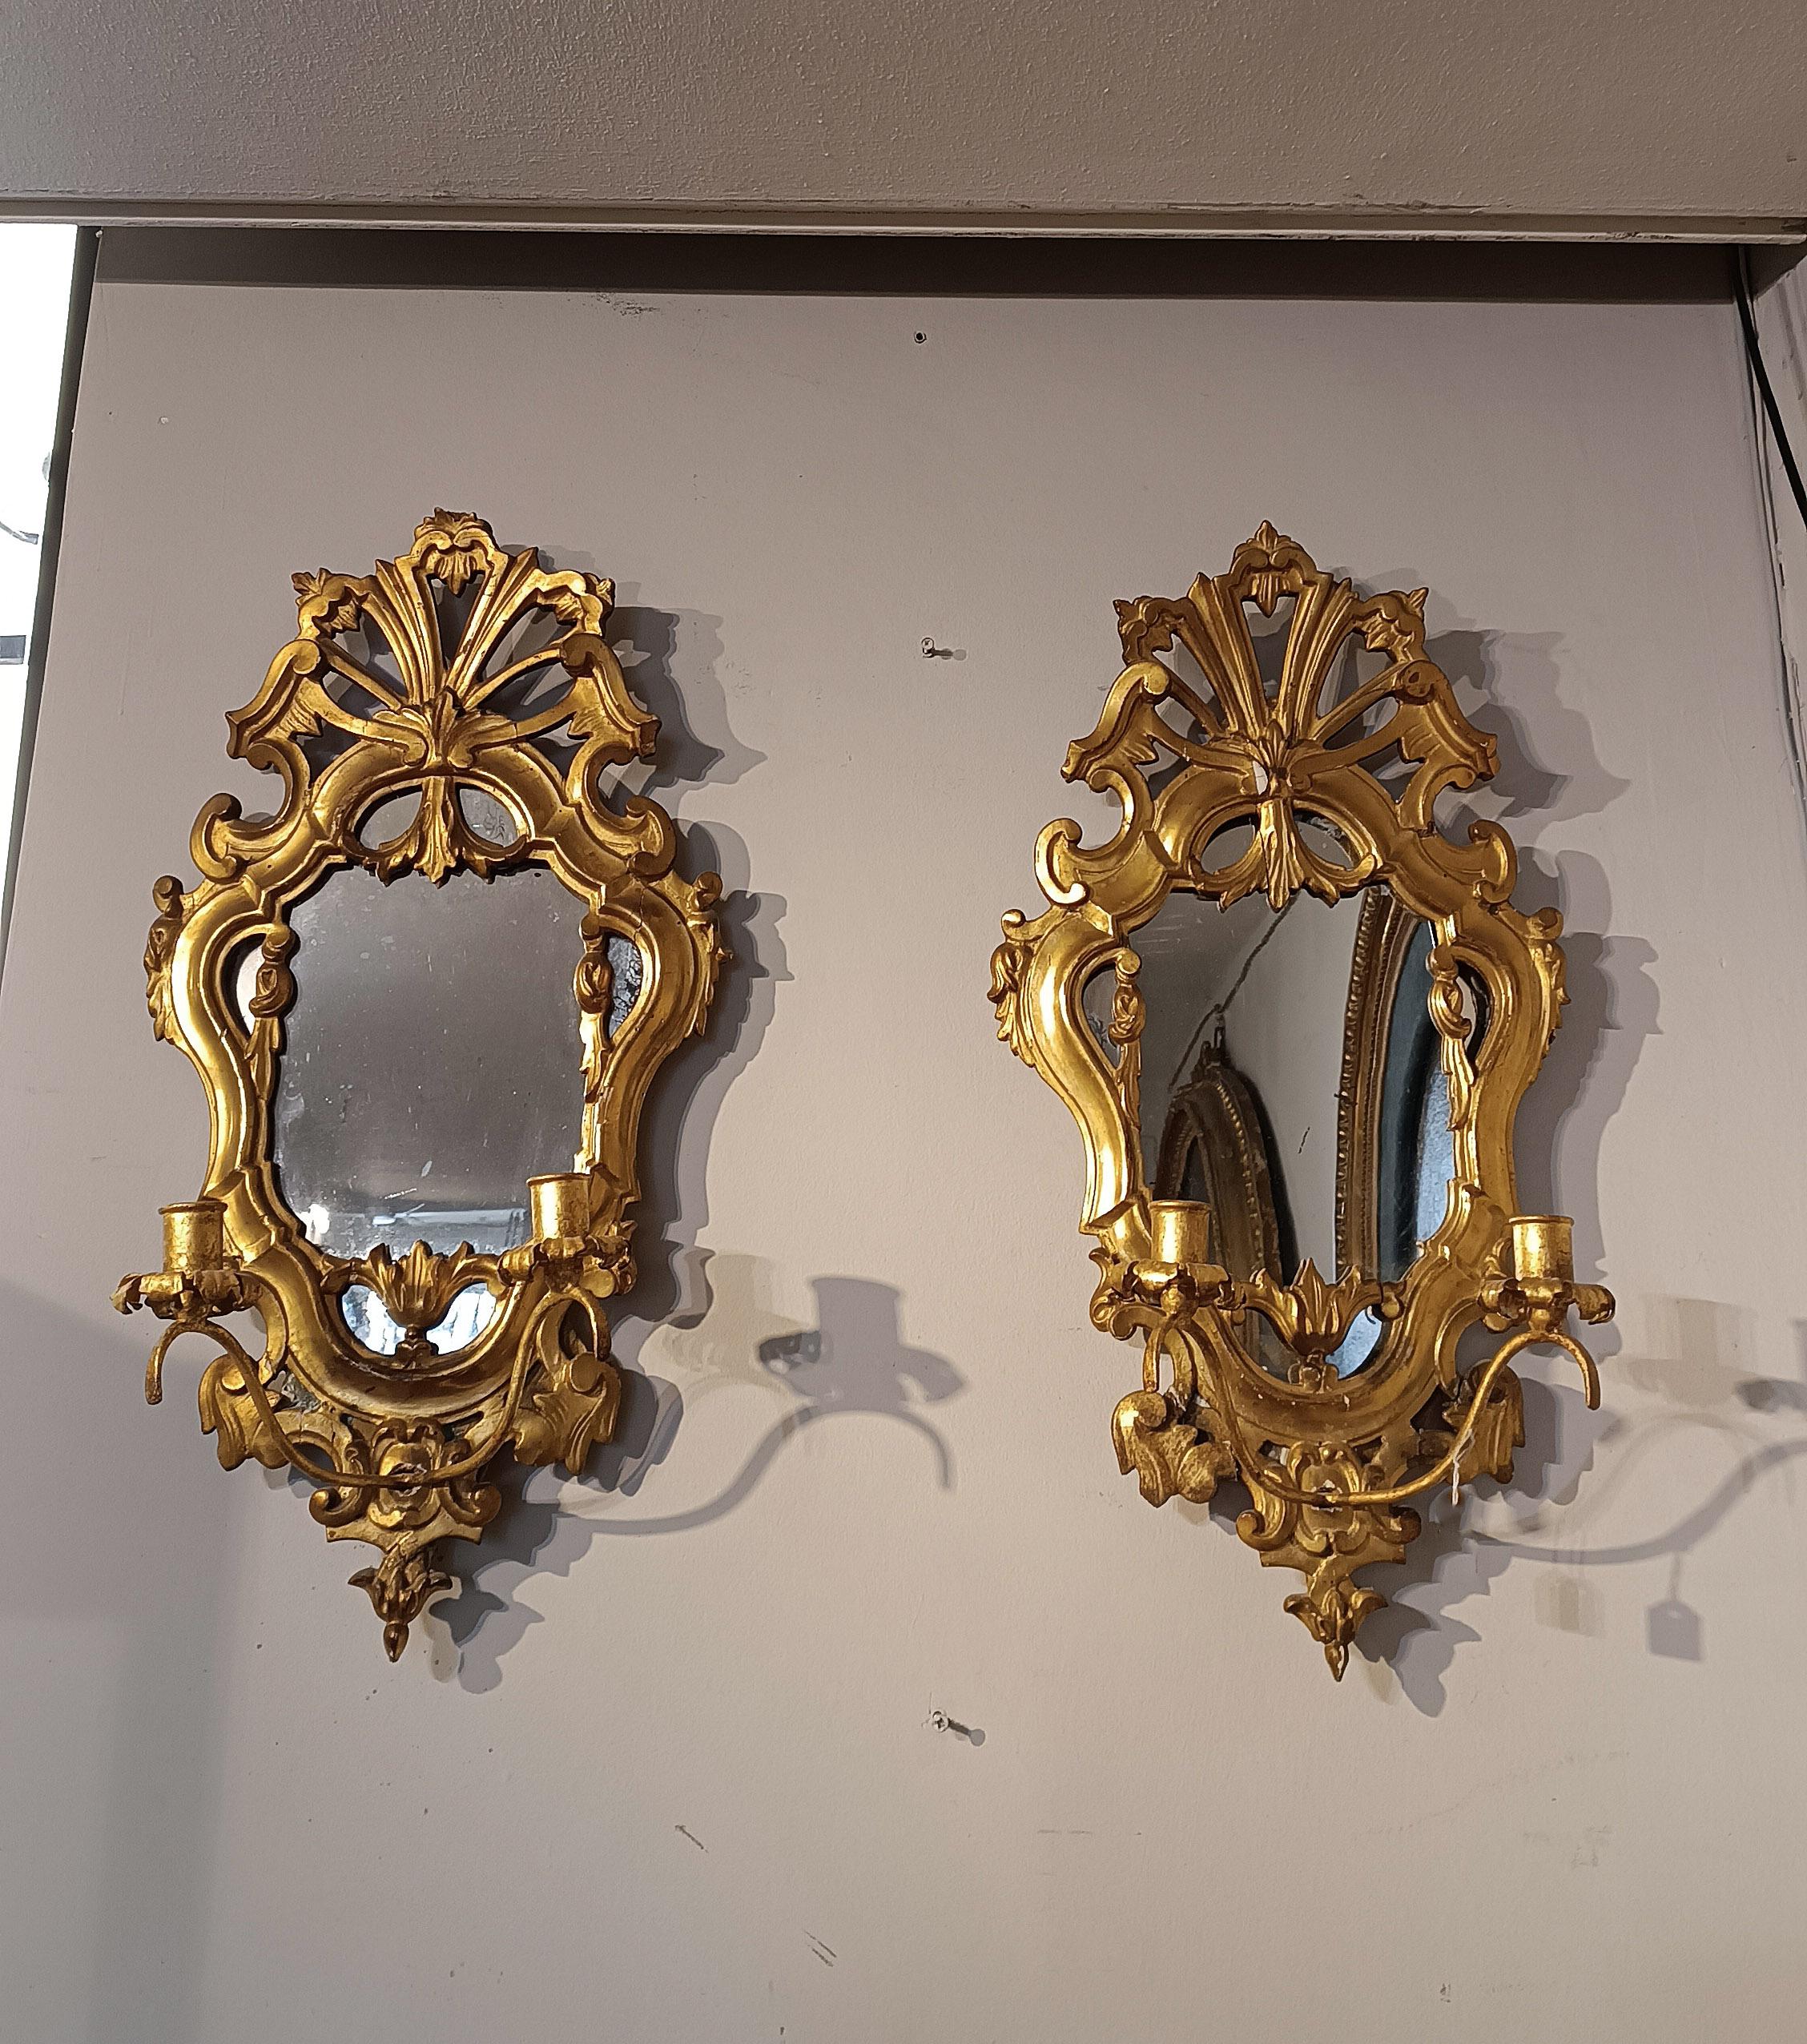 Elegant pair of small mirrors in pine wood, finely carved and gilded with pure gold leaf. The frames are decorated with scrolls and vegetal motifs, as is the cymatium which features an elaborate curl. The mirrors are equipped with candle holder arms